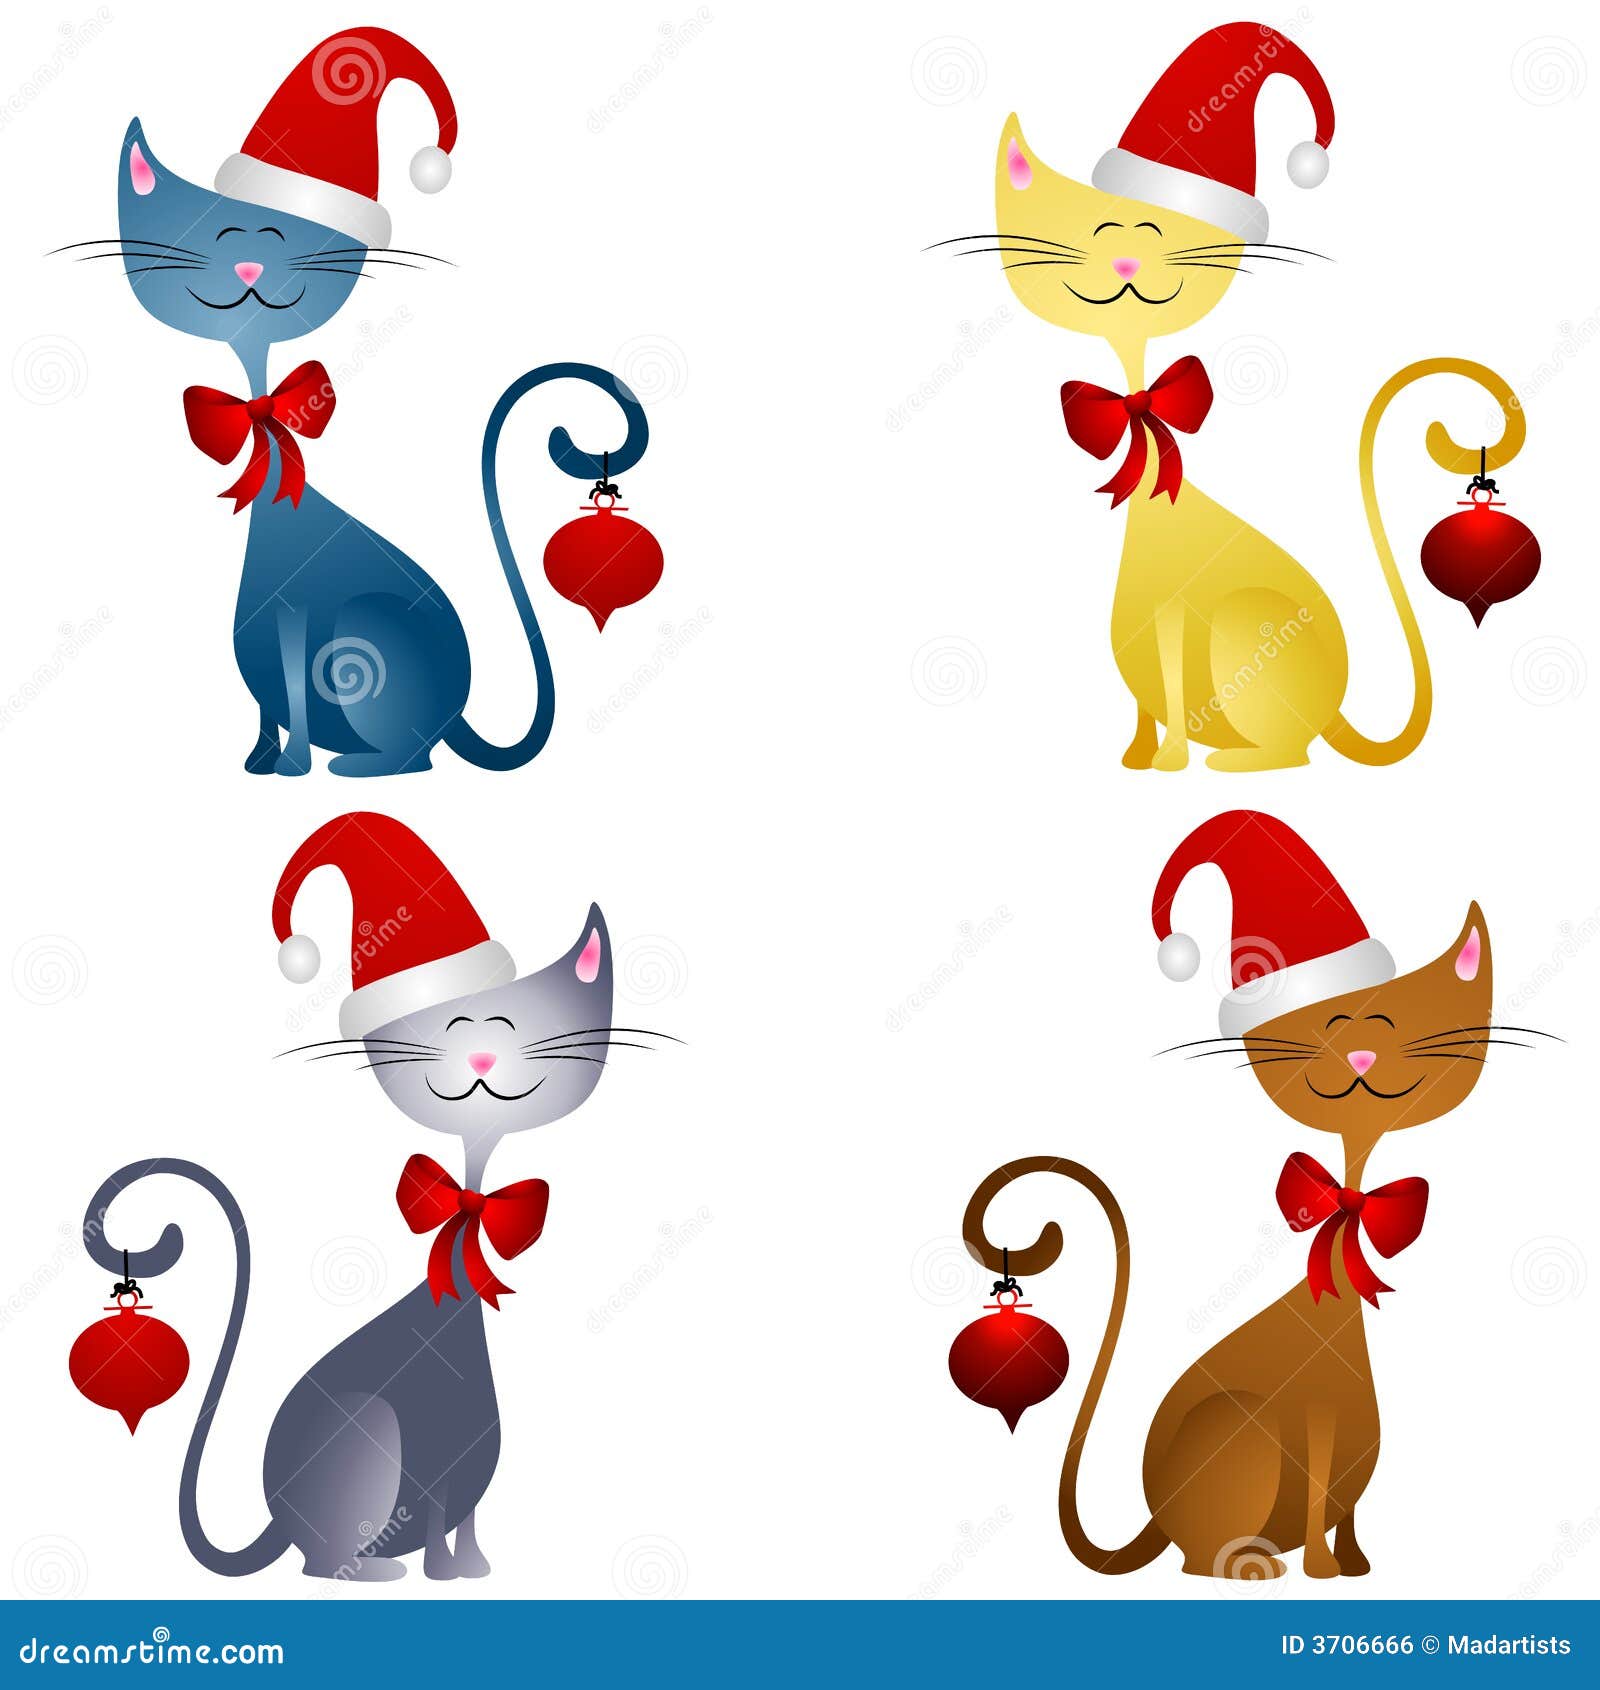 clipart christmas cats - photo #12